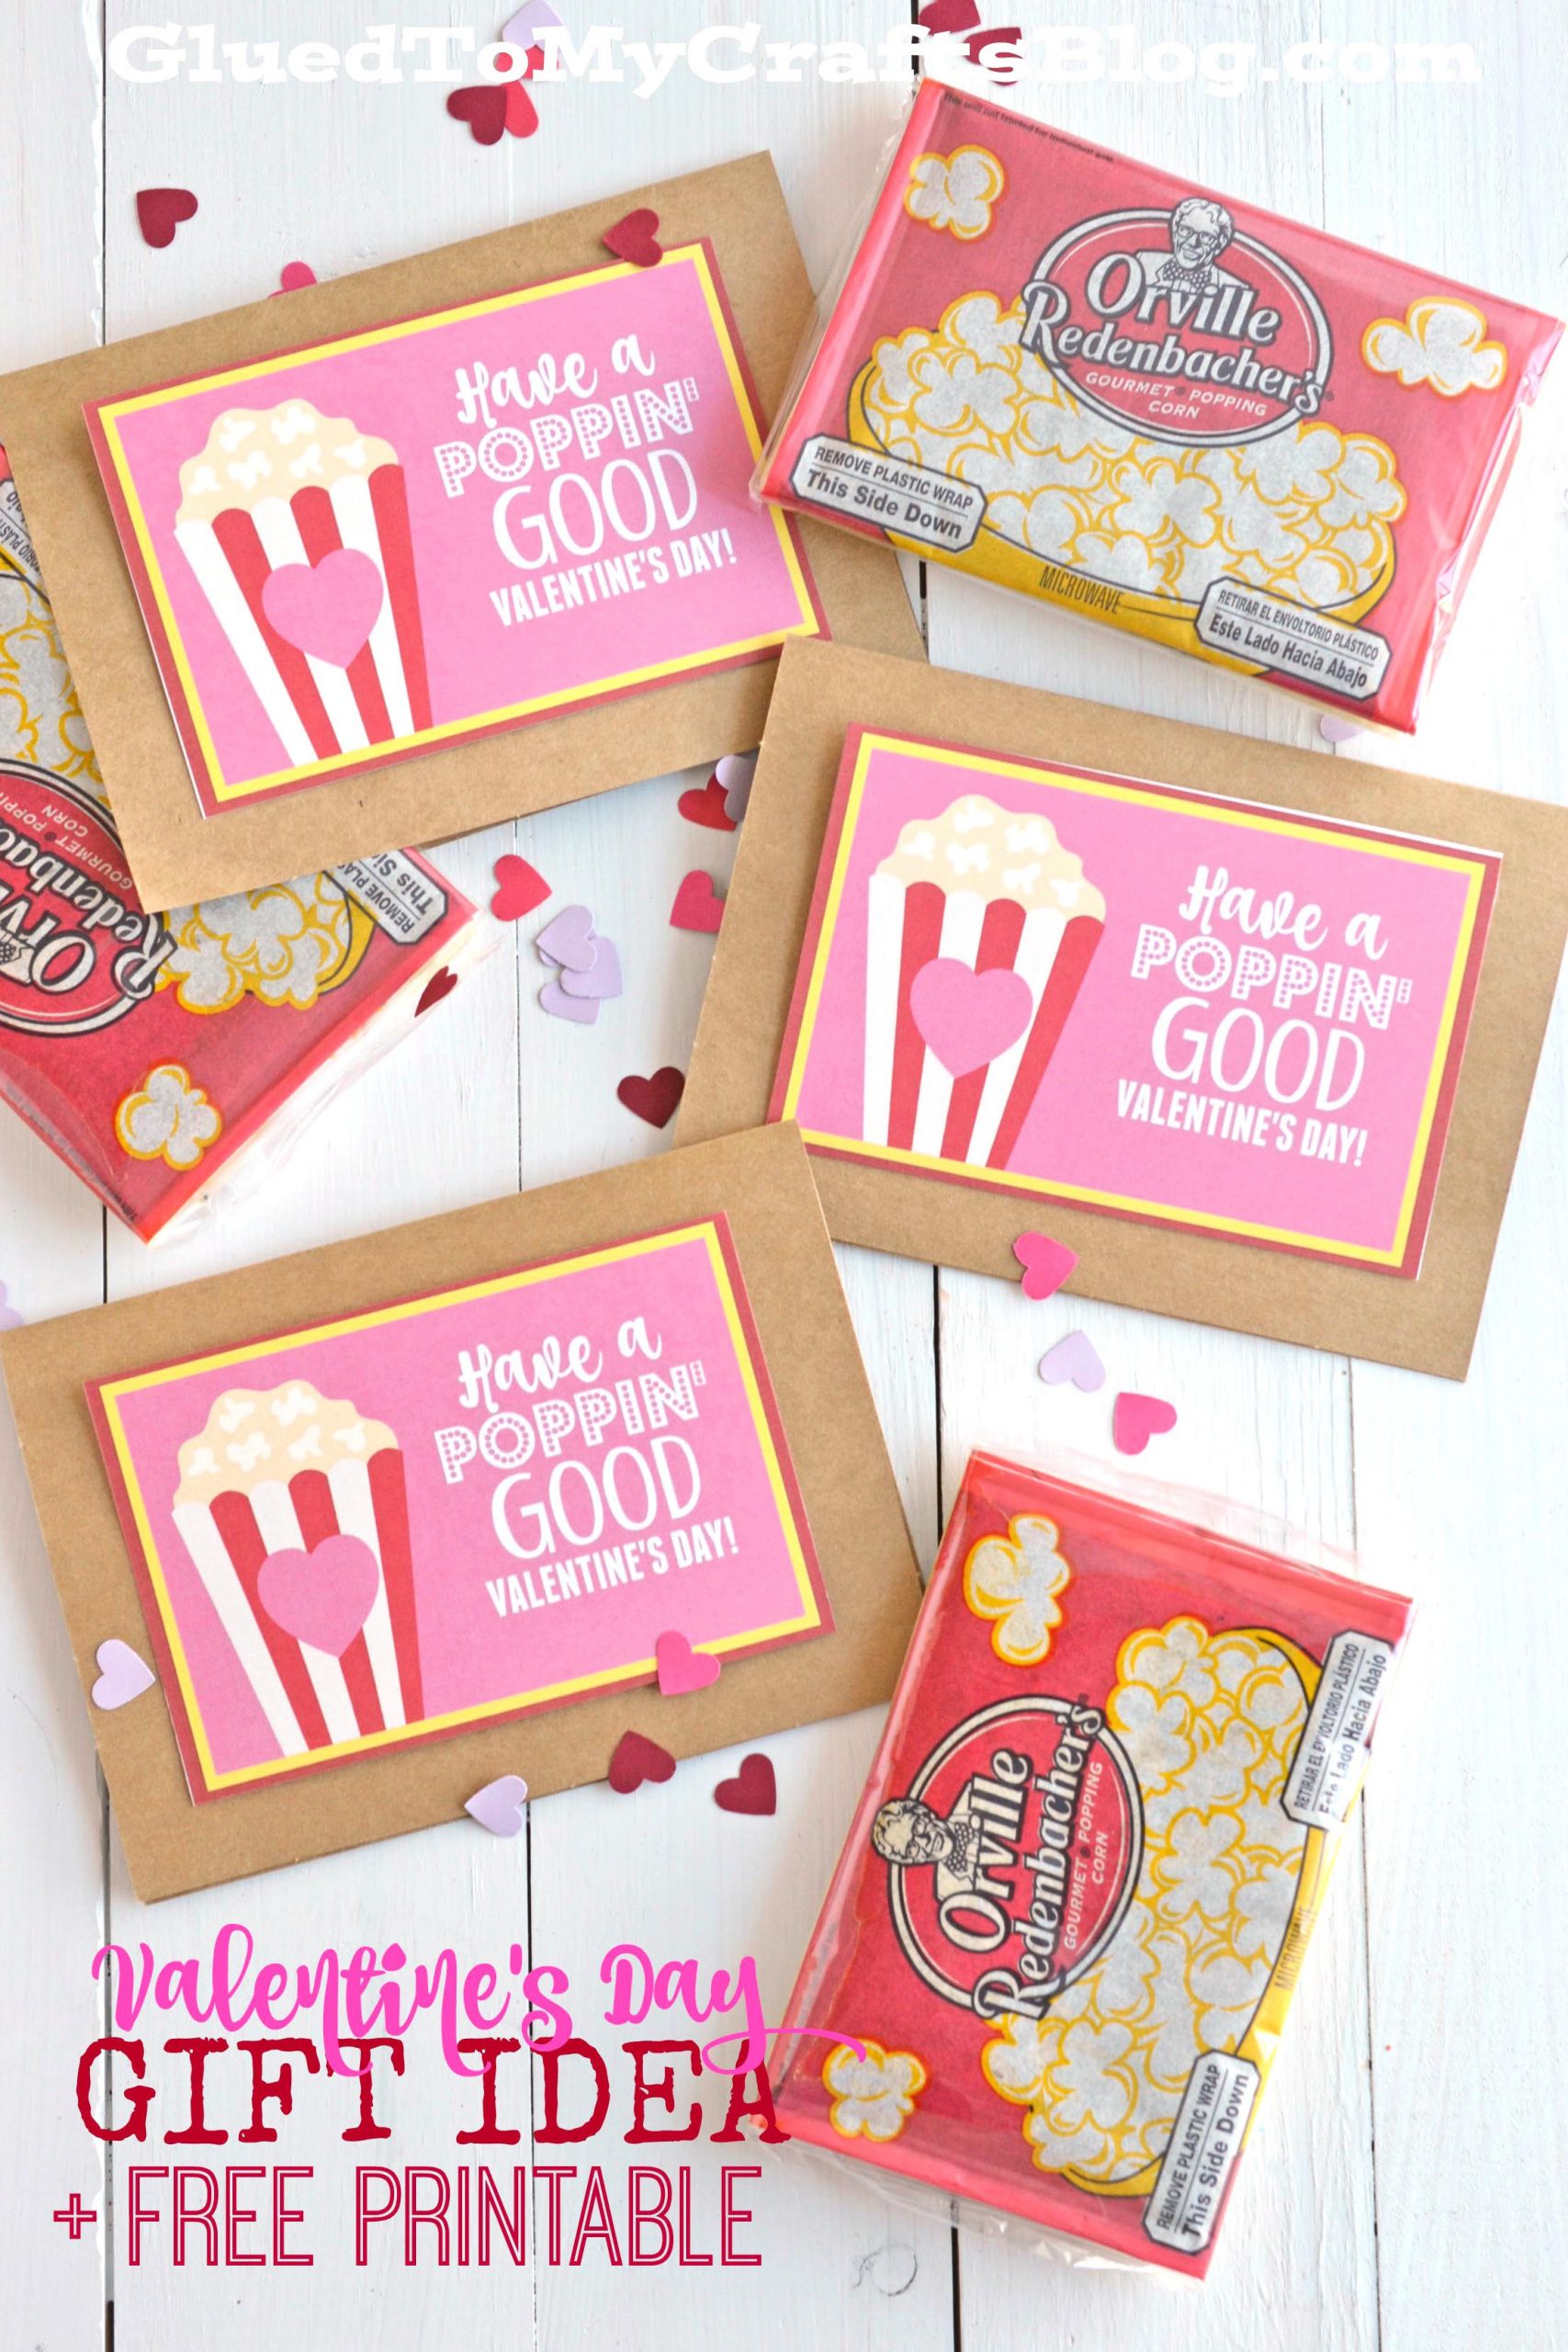 Free Valentine Gift Ideas Best Of Poppin Good Valentine S Day Gift Idea W Free Printable